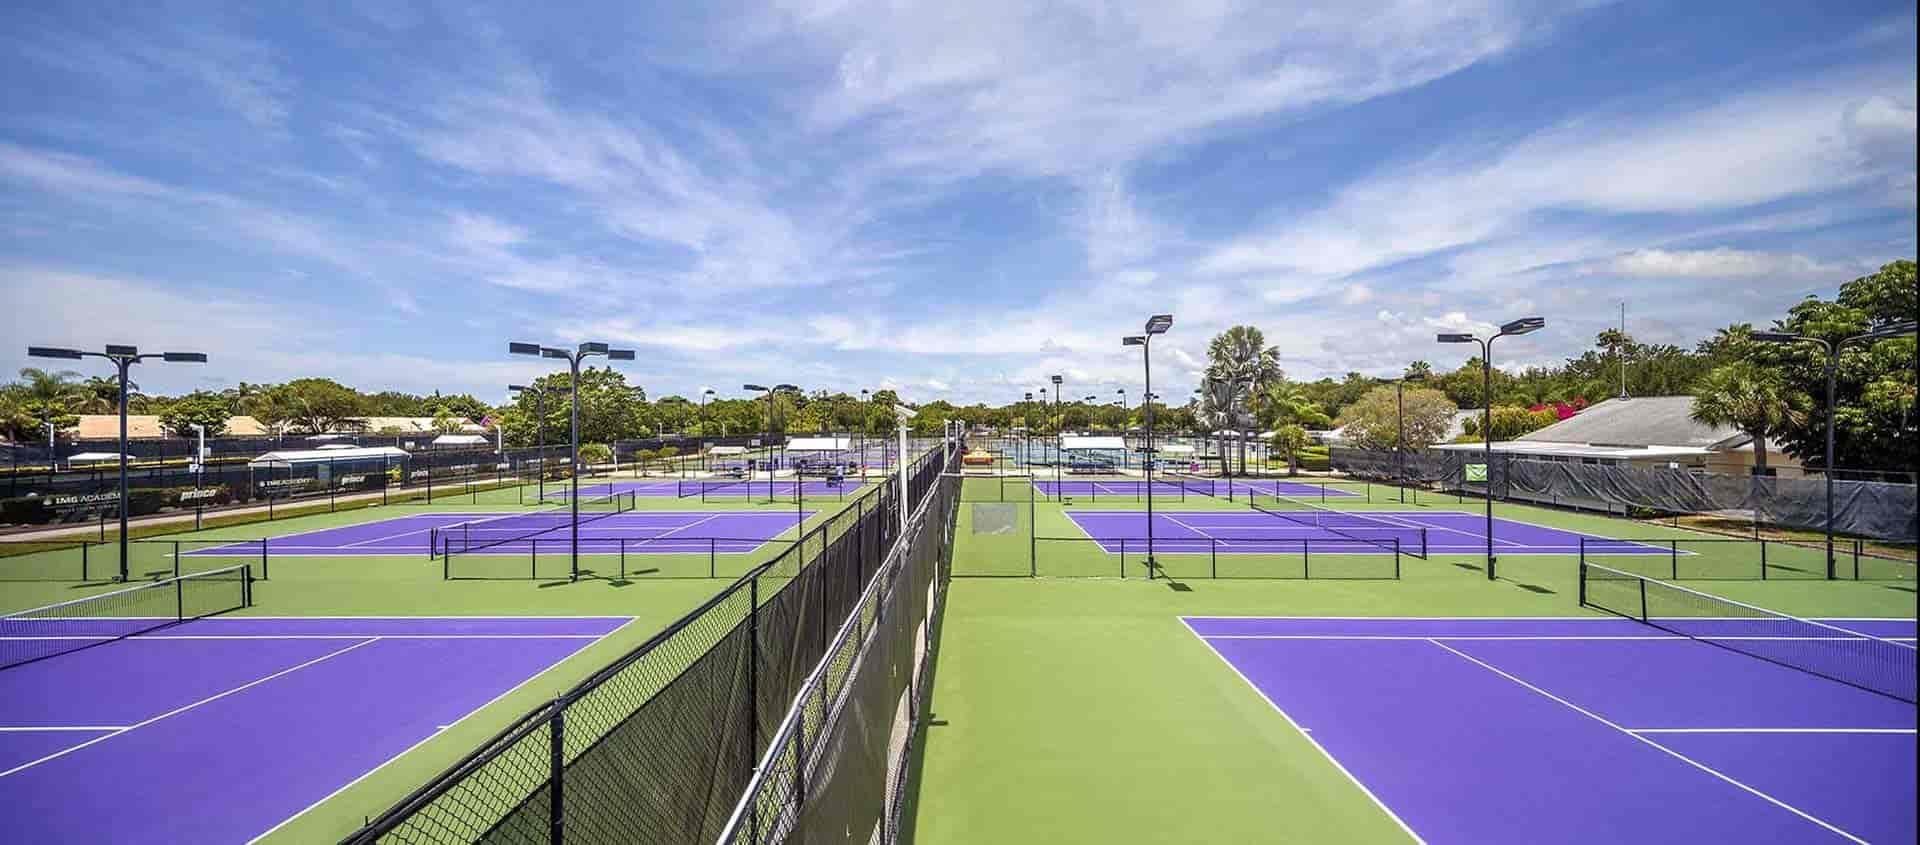 Tennis courts at IMG Academy | IMG Academy